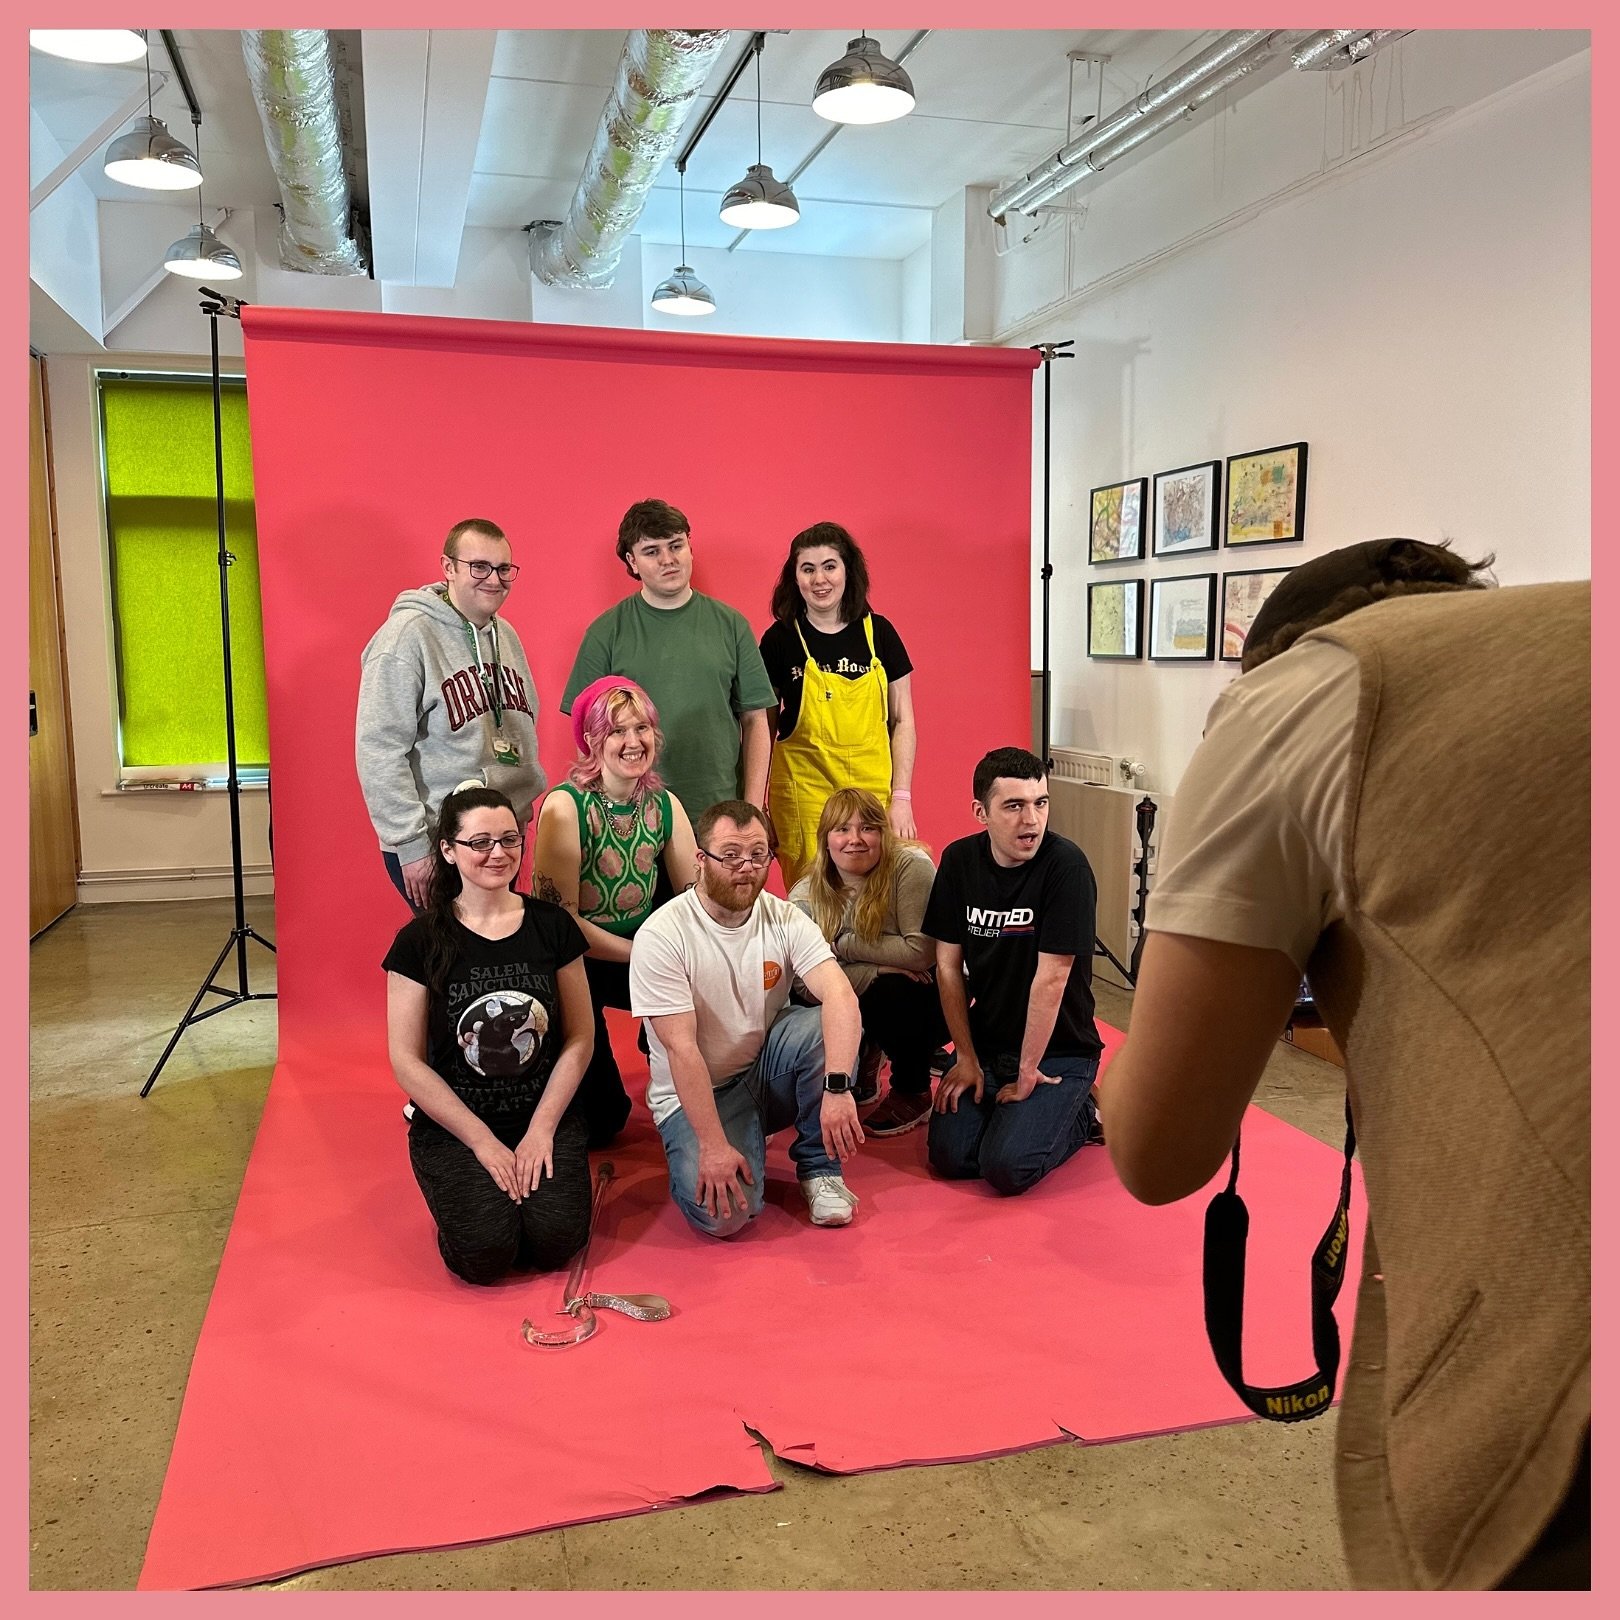 Behind the scenes of our Facilitator Training Programme photo shoot with the amazing @jackehlen and our trainees! 

We are excited for our next sessions this weekend! 

#RAWD #rawdproject #liverpool #disabledtheatre #disabledpeopleinthearts #disabled